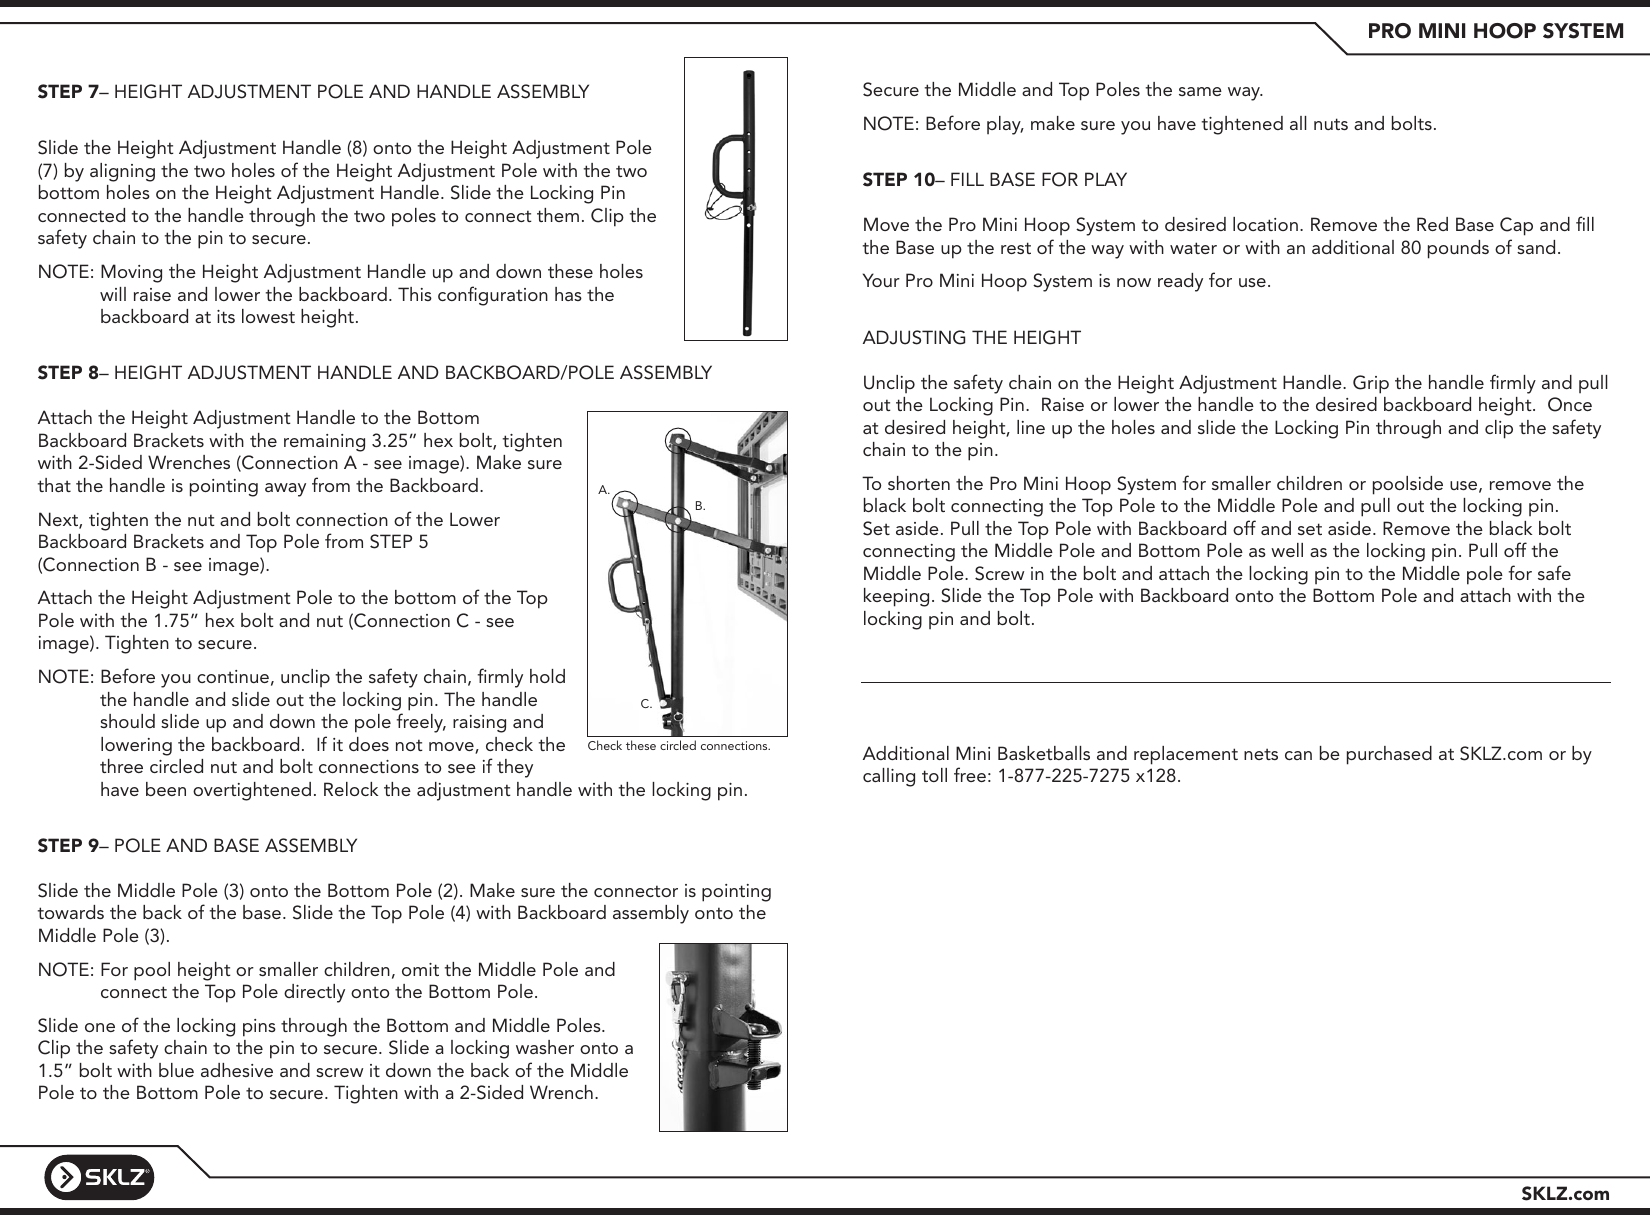 Page 4 of 5 - Pro Mini Hoop System Instructions